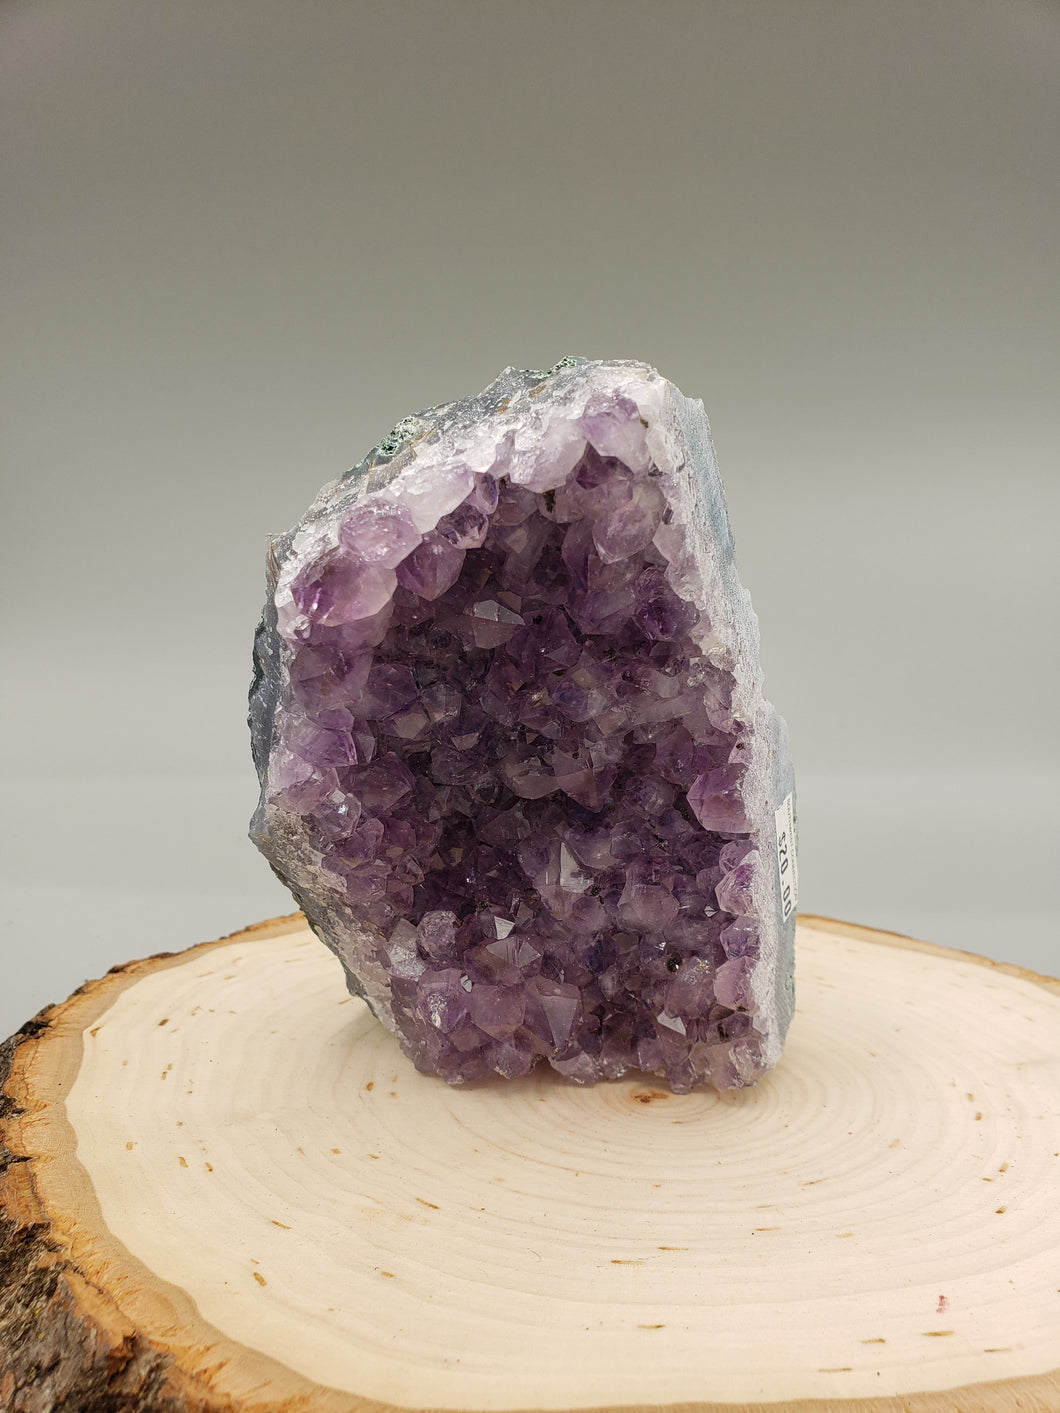 AMETHYST- NATURAL - FREE STANDING STONE